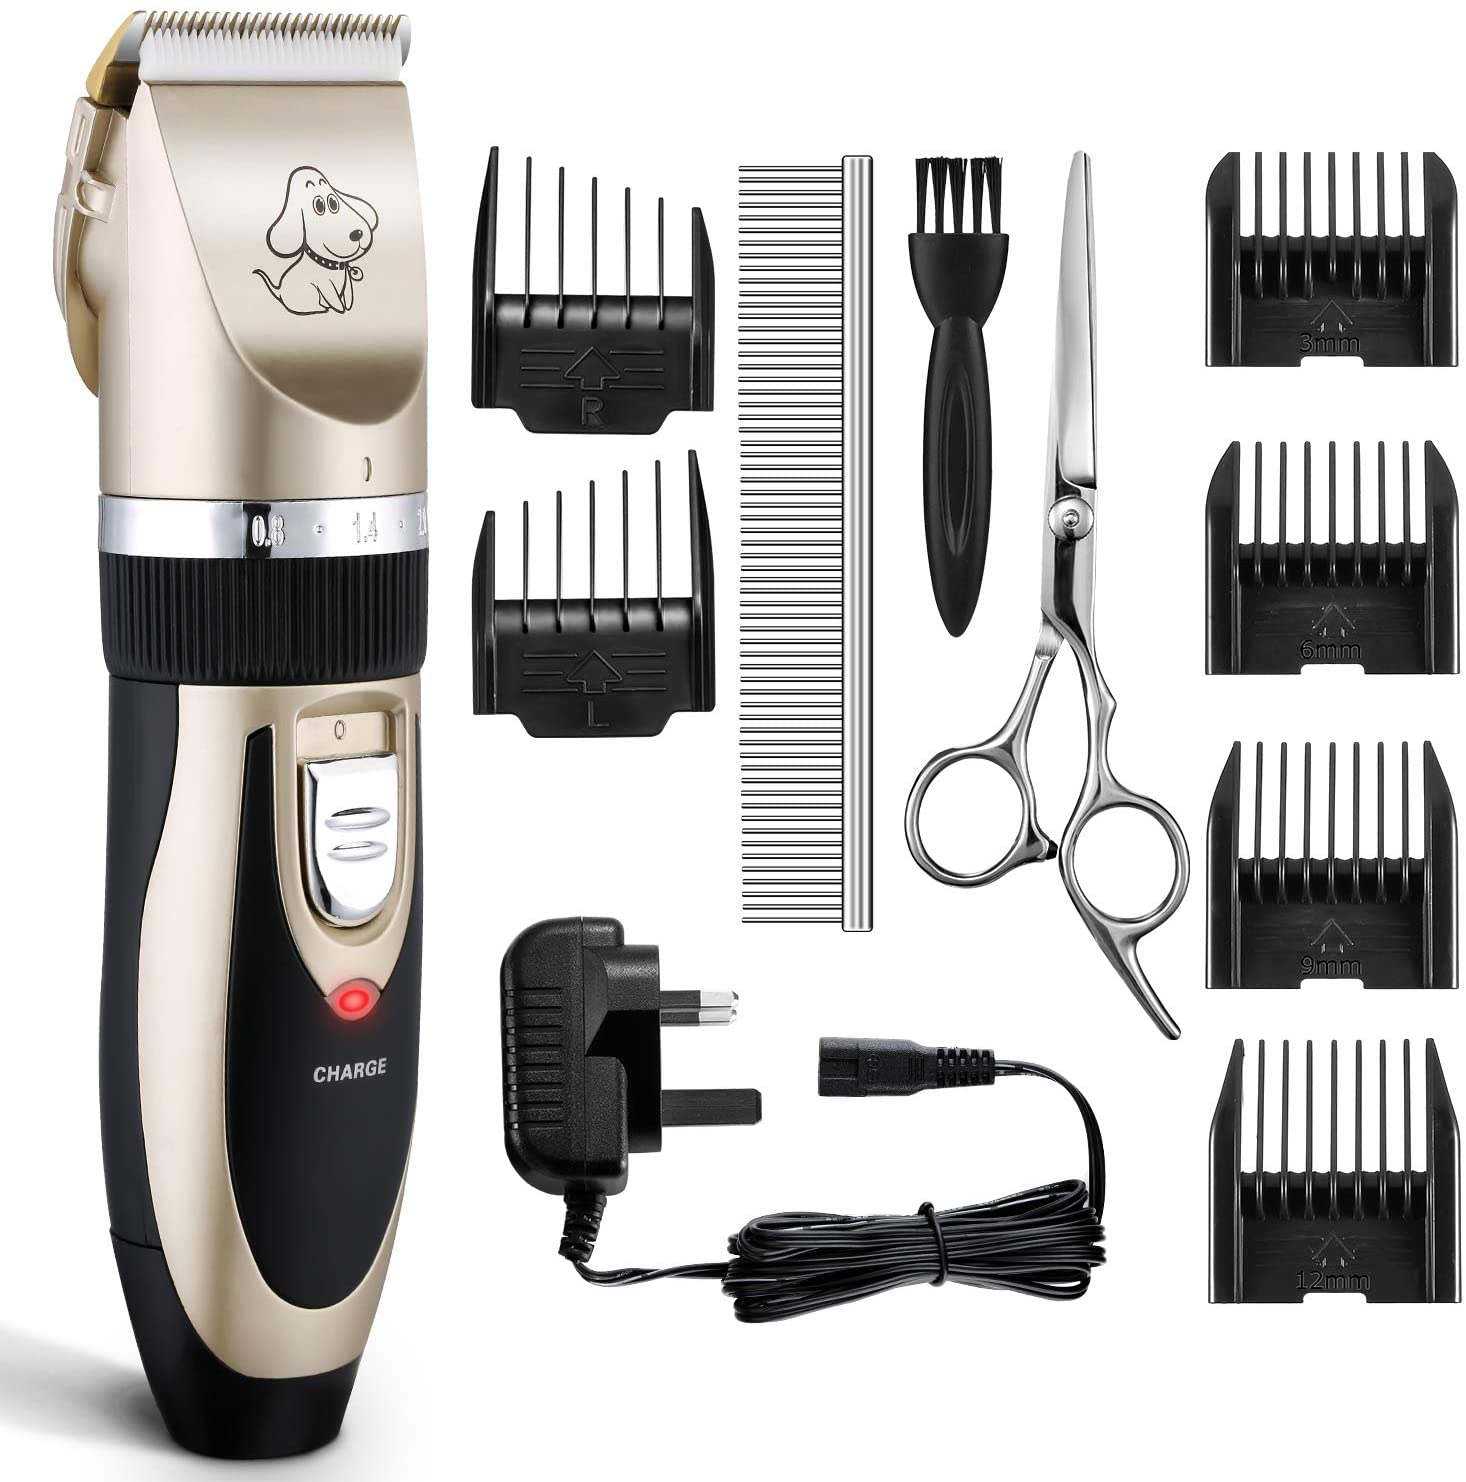 professional hair clippers kit